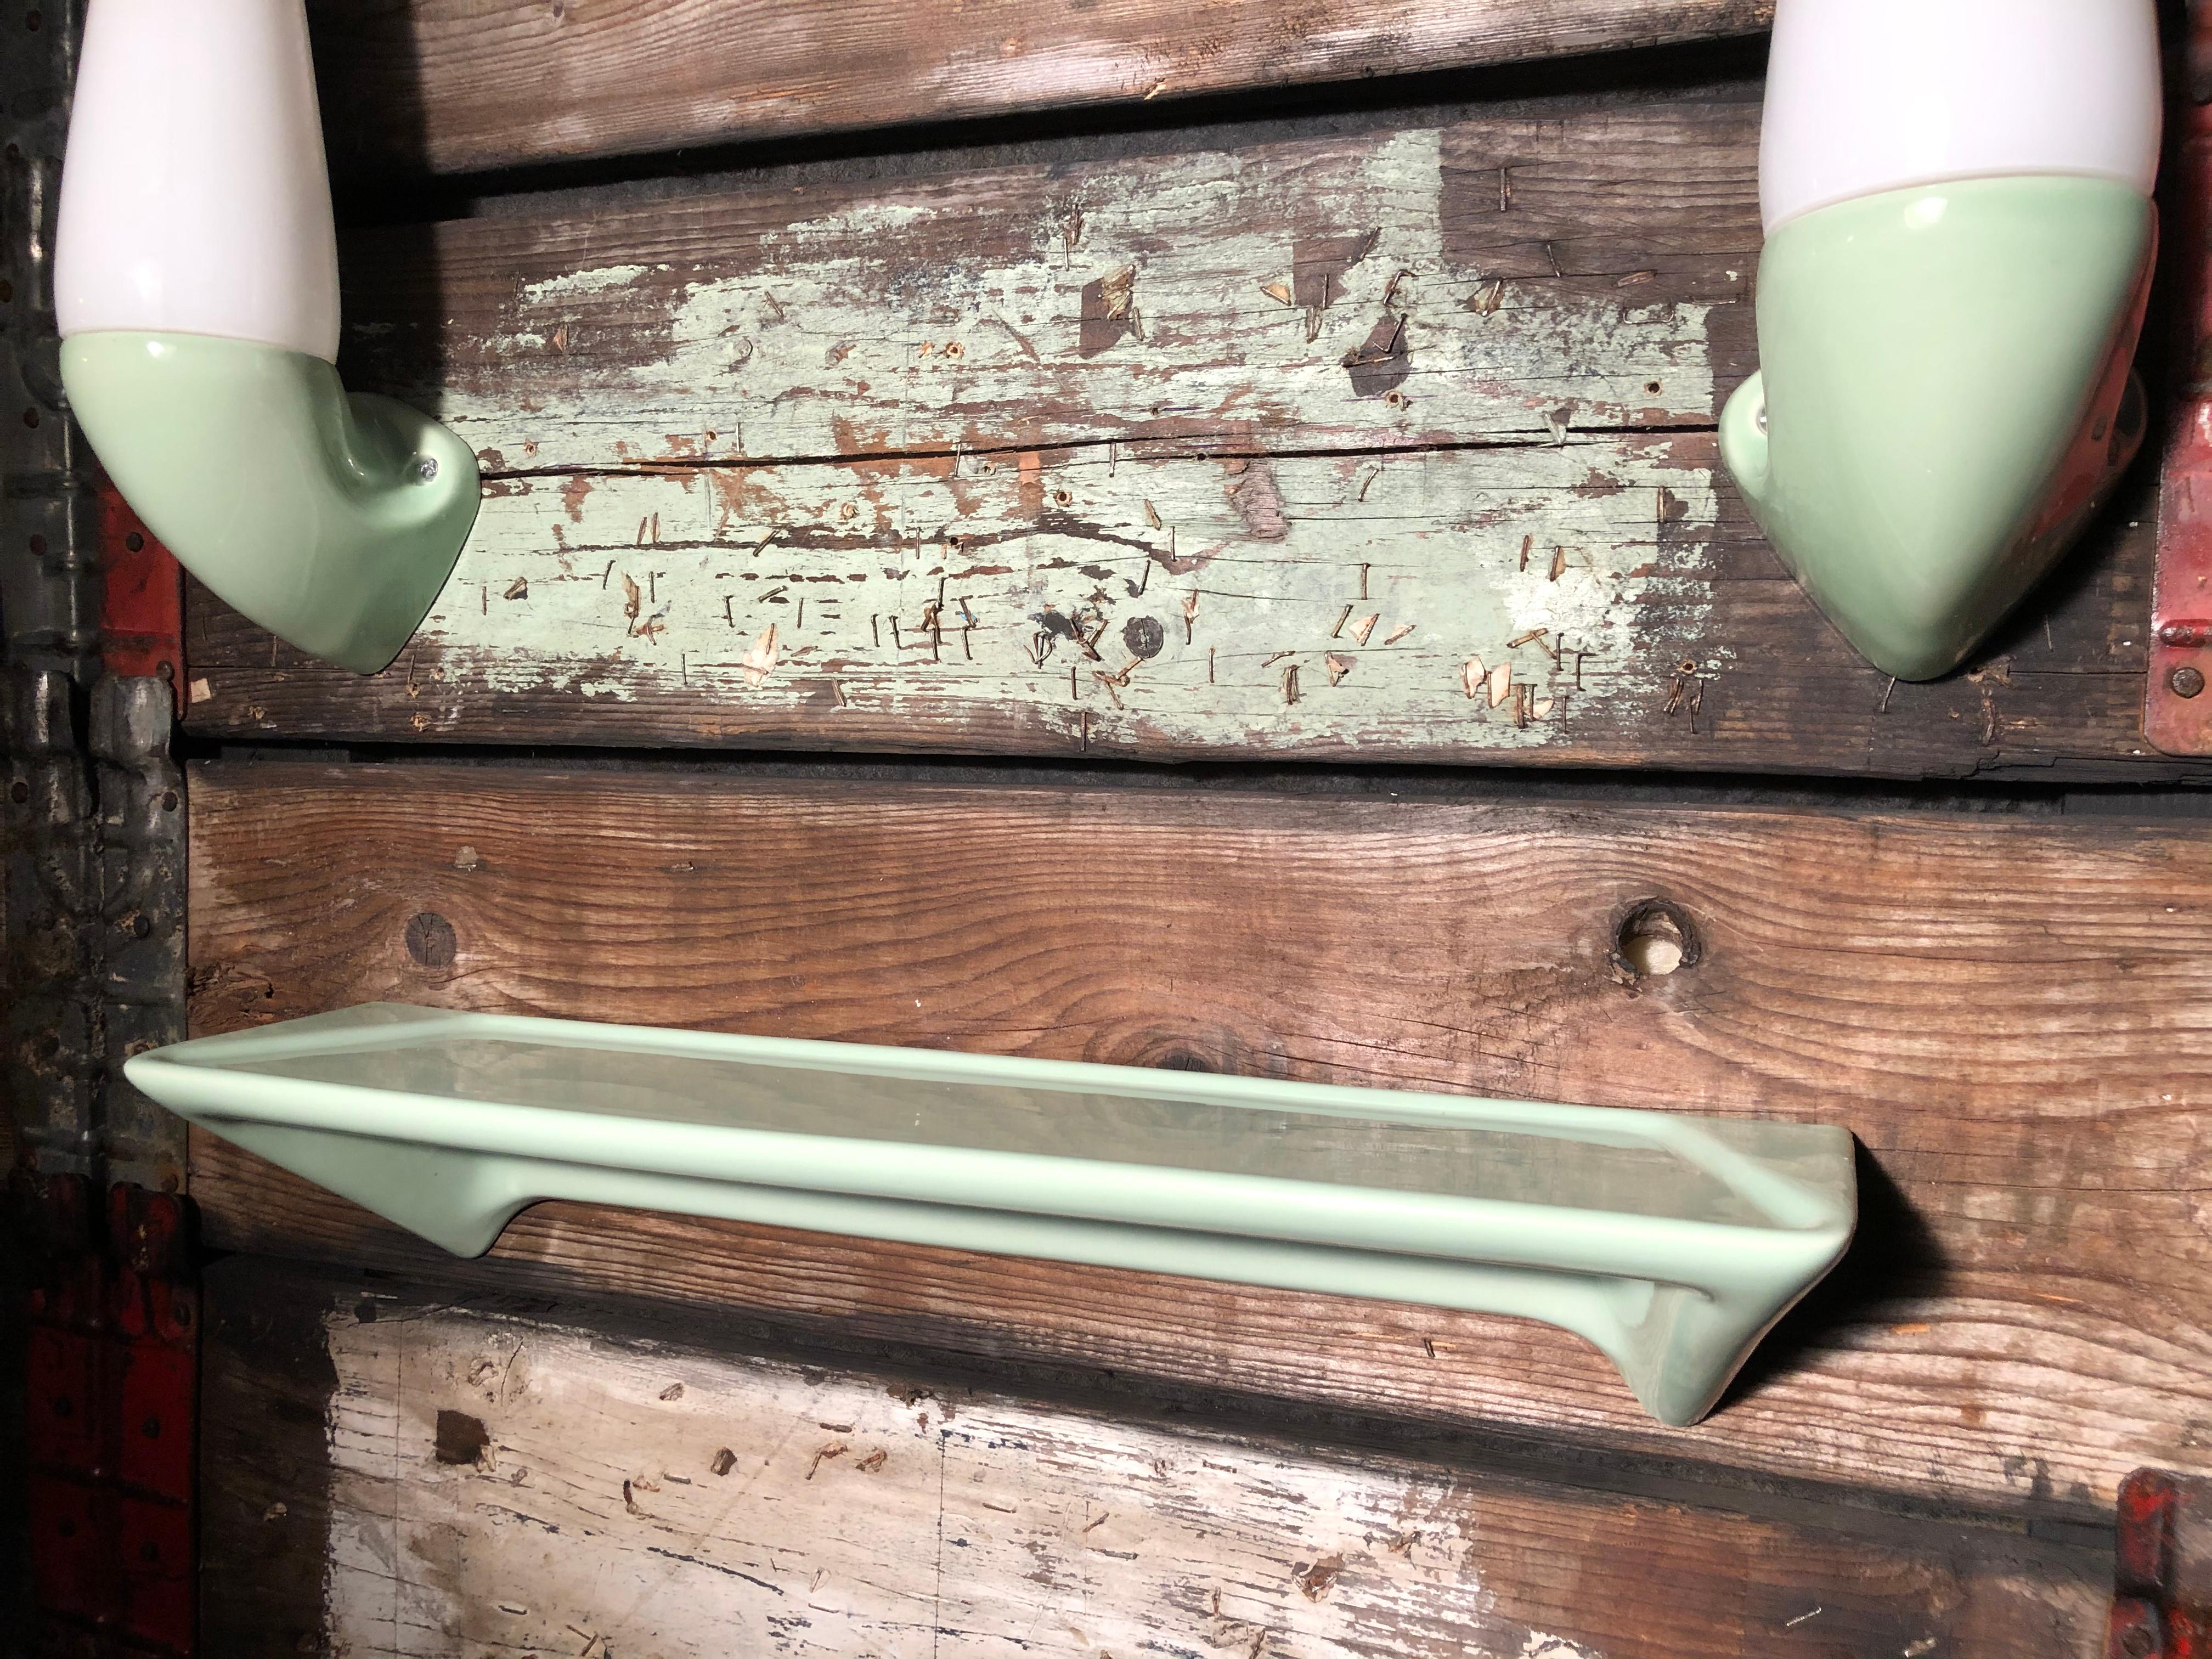 Hand-Crafted Vintage Ifö of Sweden Set of Ceramic Bathroom Lamps and Shelf from the 1960s